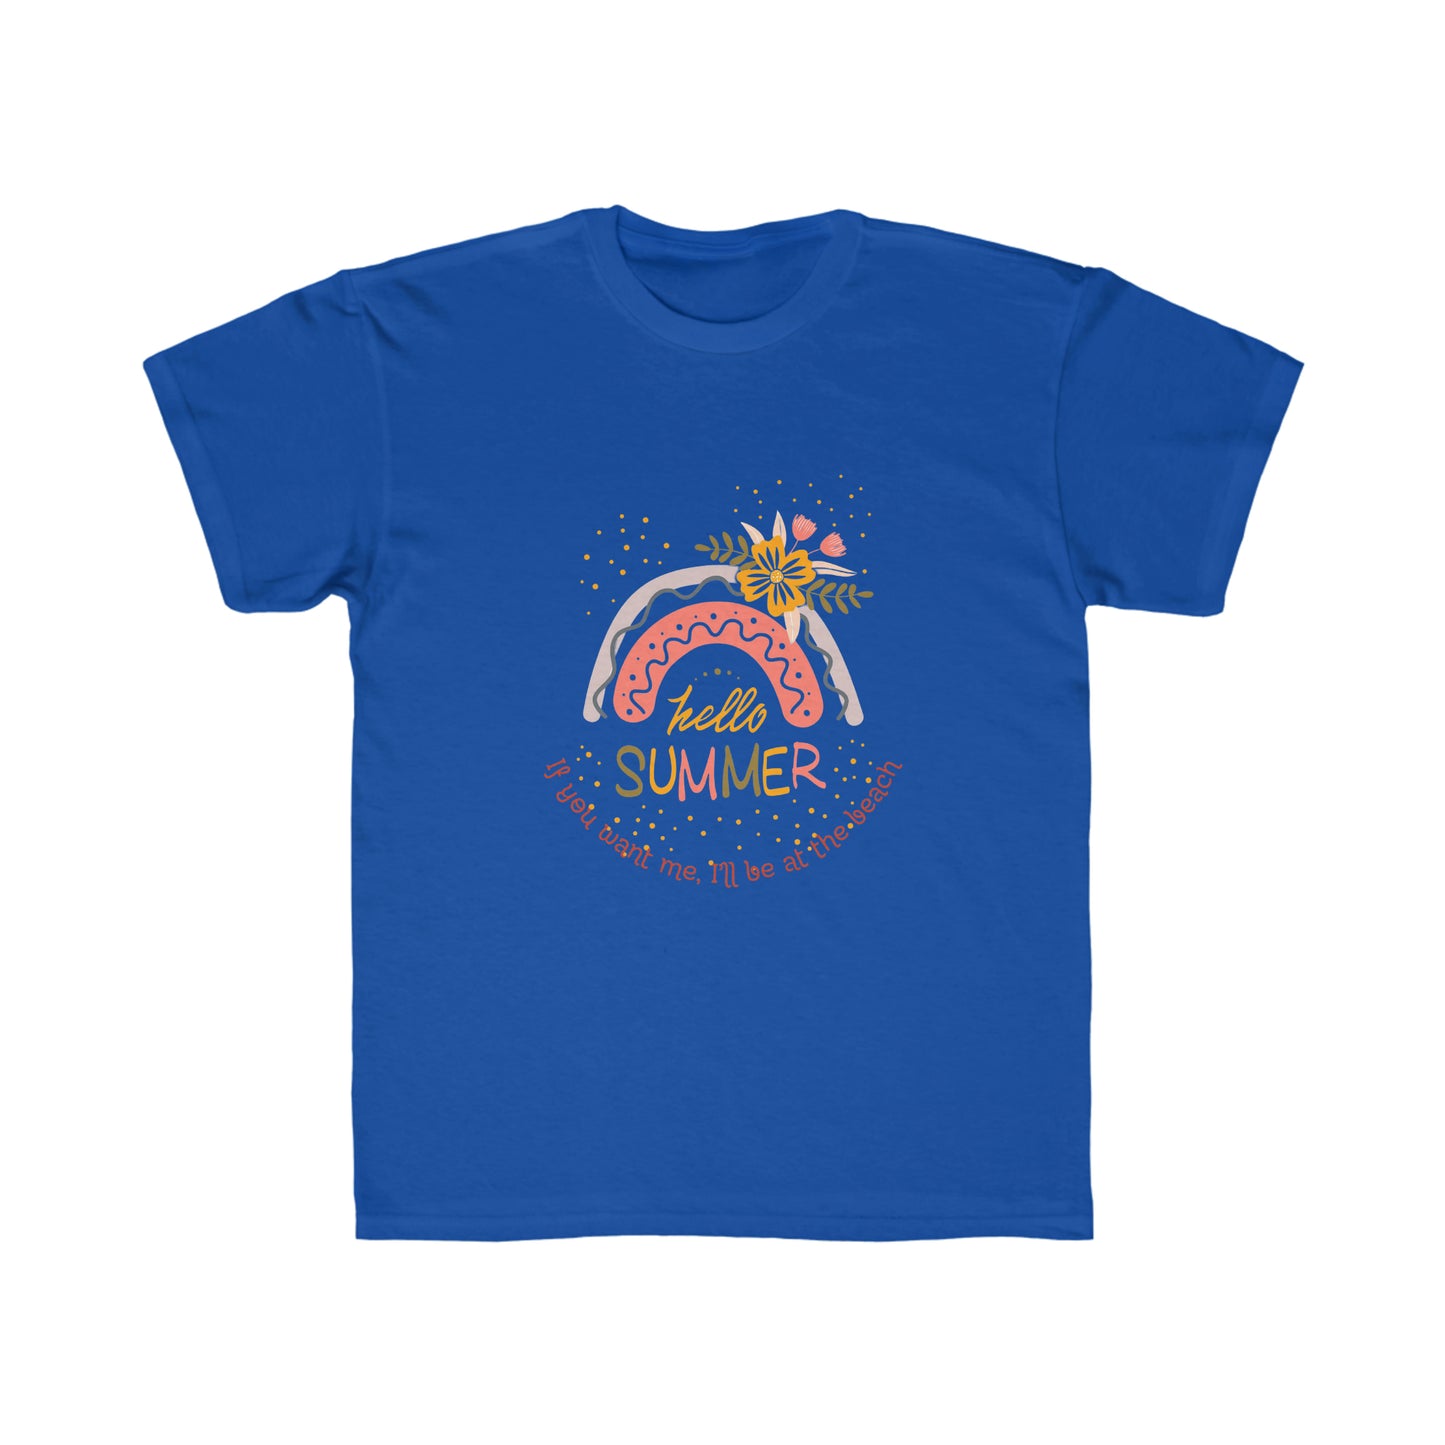 ‘If you want me, I’ll be at the beach’ Printed Front & Back. Kids Regular Fit Tee